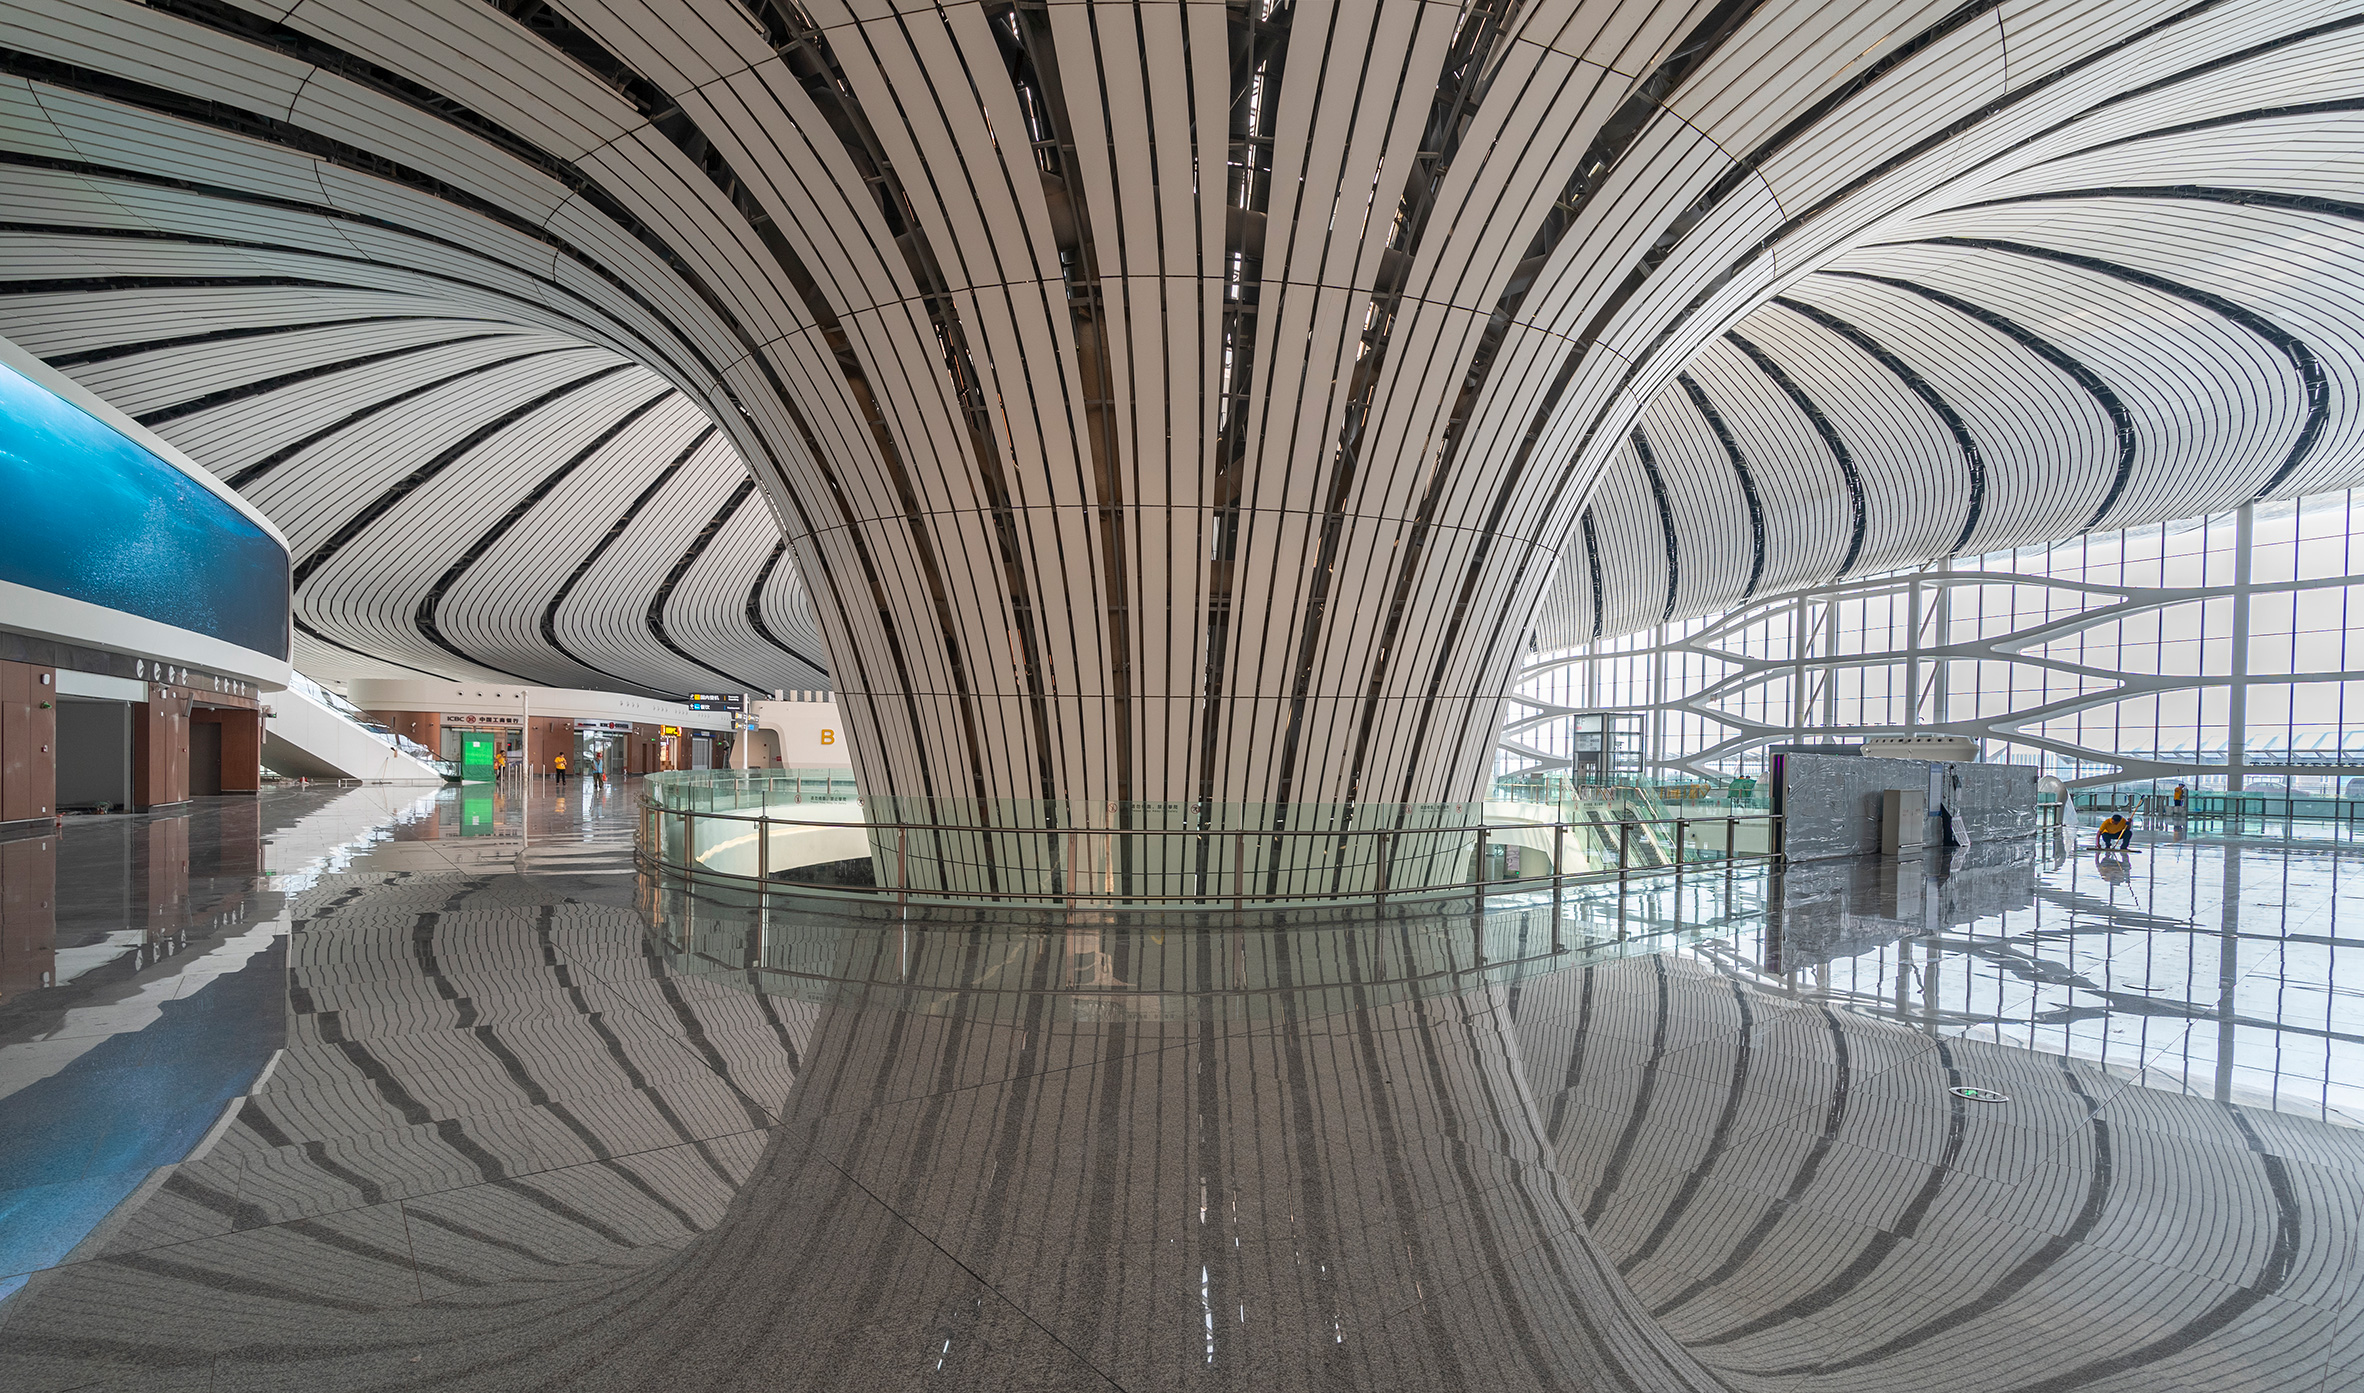 360 Degree Images Reveal Inside Zaha Hadid Architects Beijing Daxing